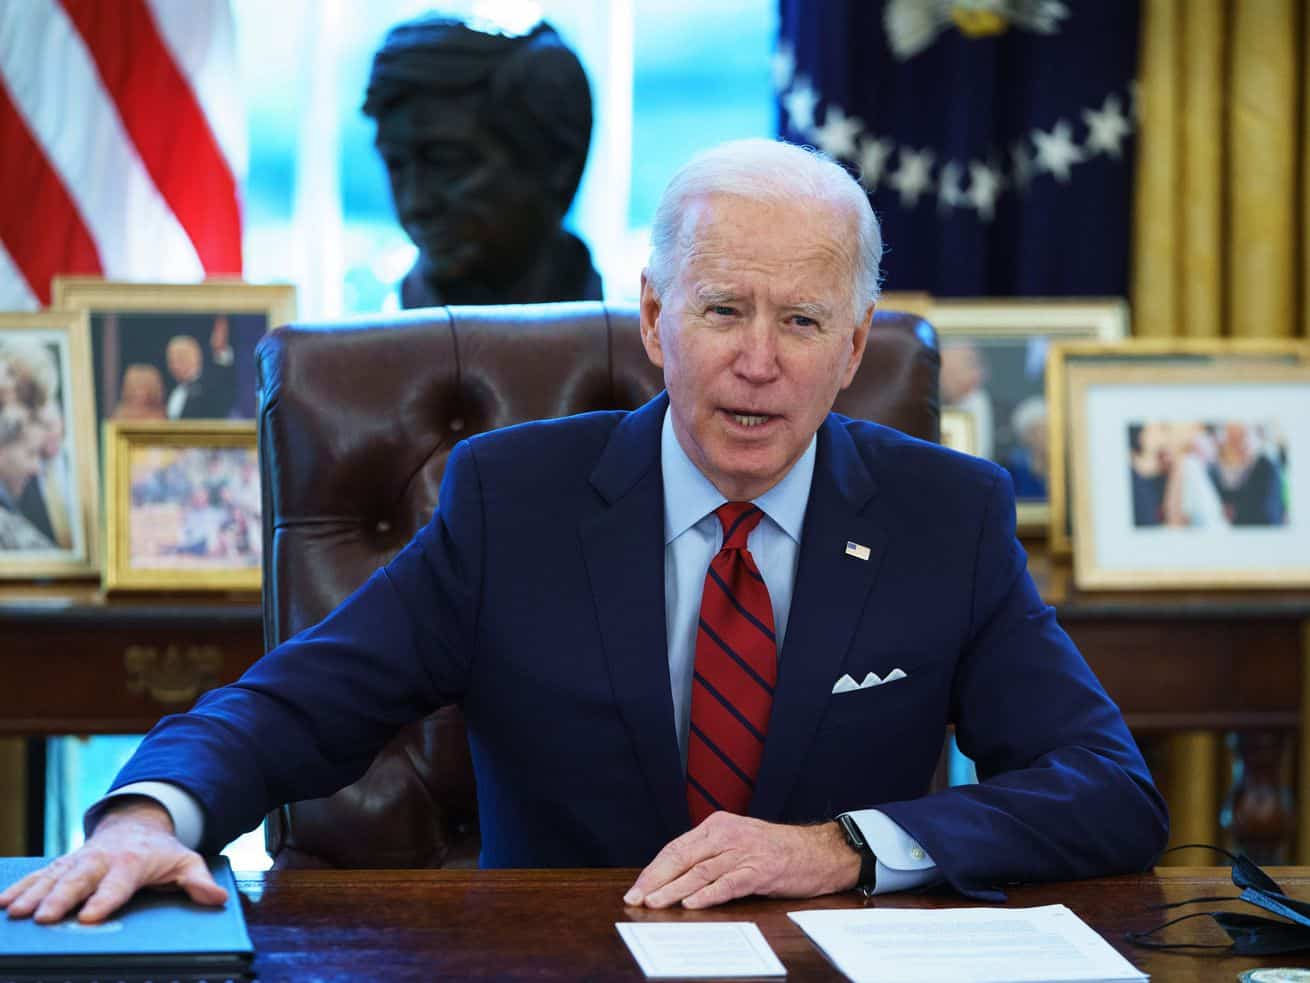 Biden’s next executive actions address family separations, legal immigration and asylum